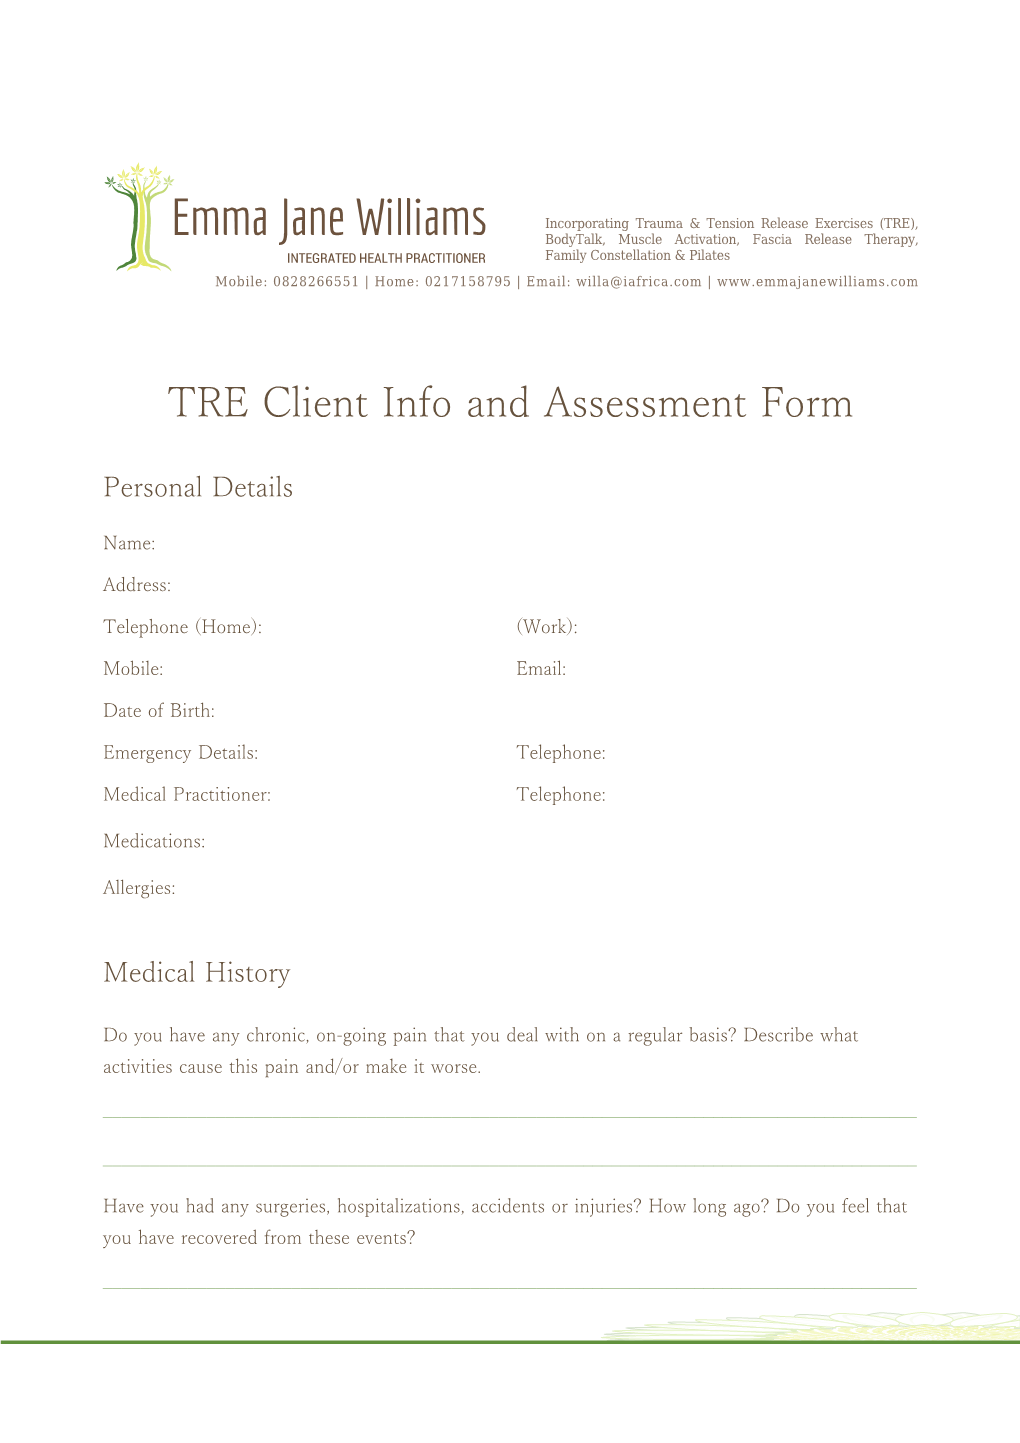 TRE Client Info and Assessment Form